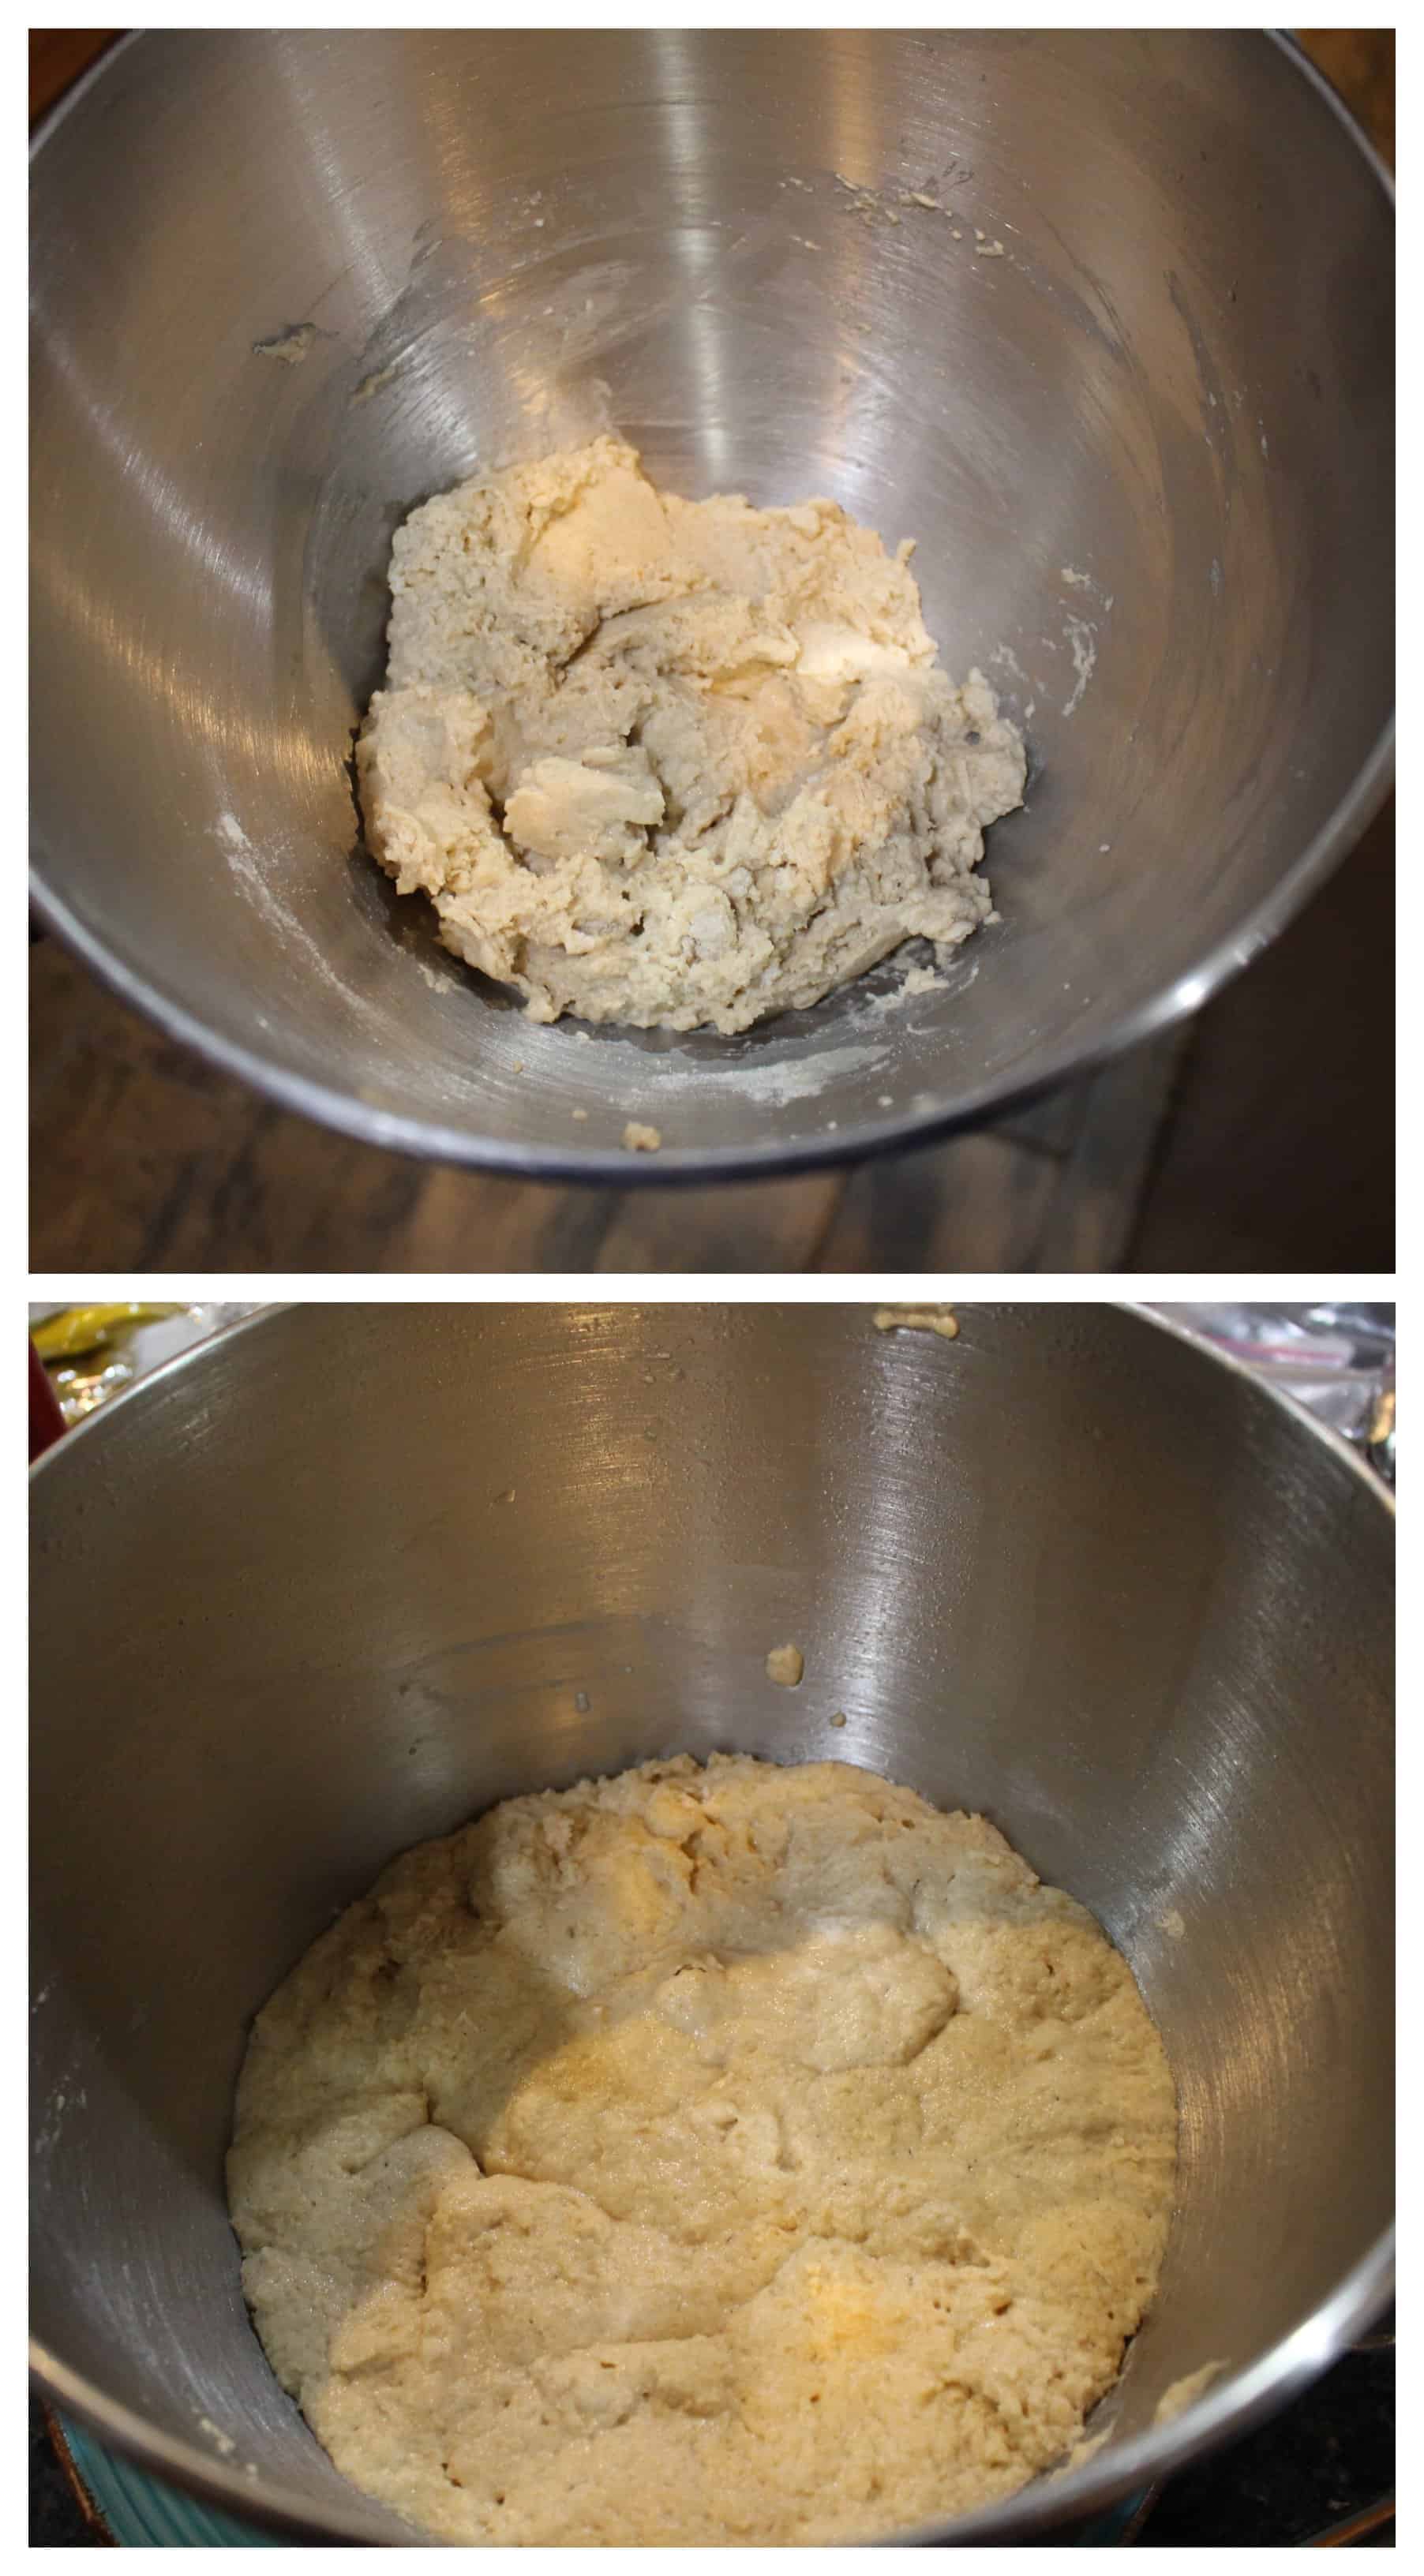 adding flour to the yeast